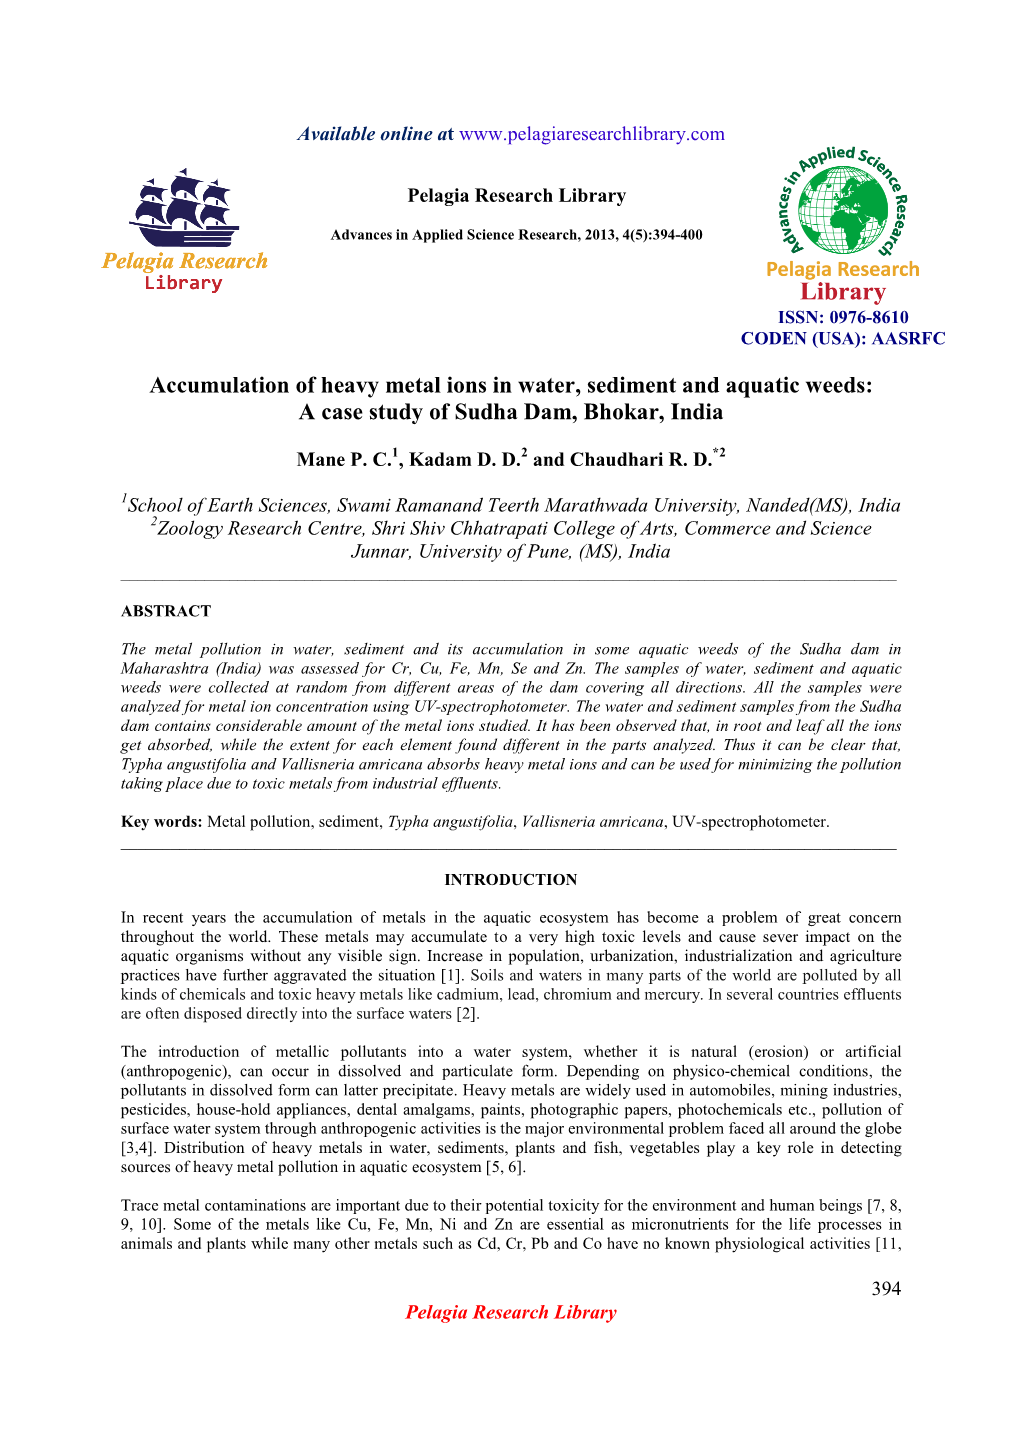 Accumulation of Heavy Metal Ions in Water, Sediment and Aquatic Weeds: a Case Study of Sudha Dam, Bhokar, India